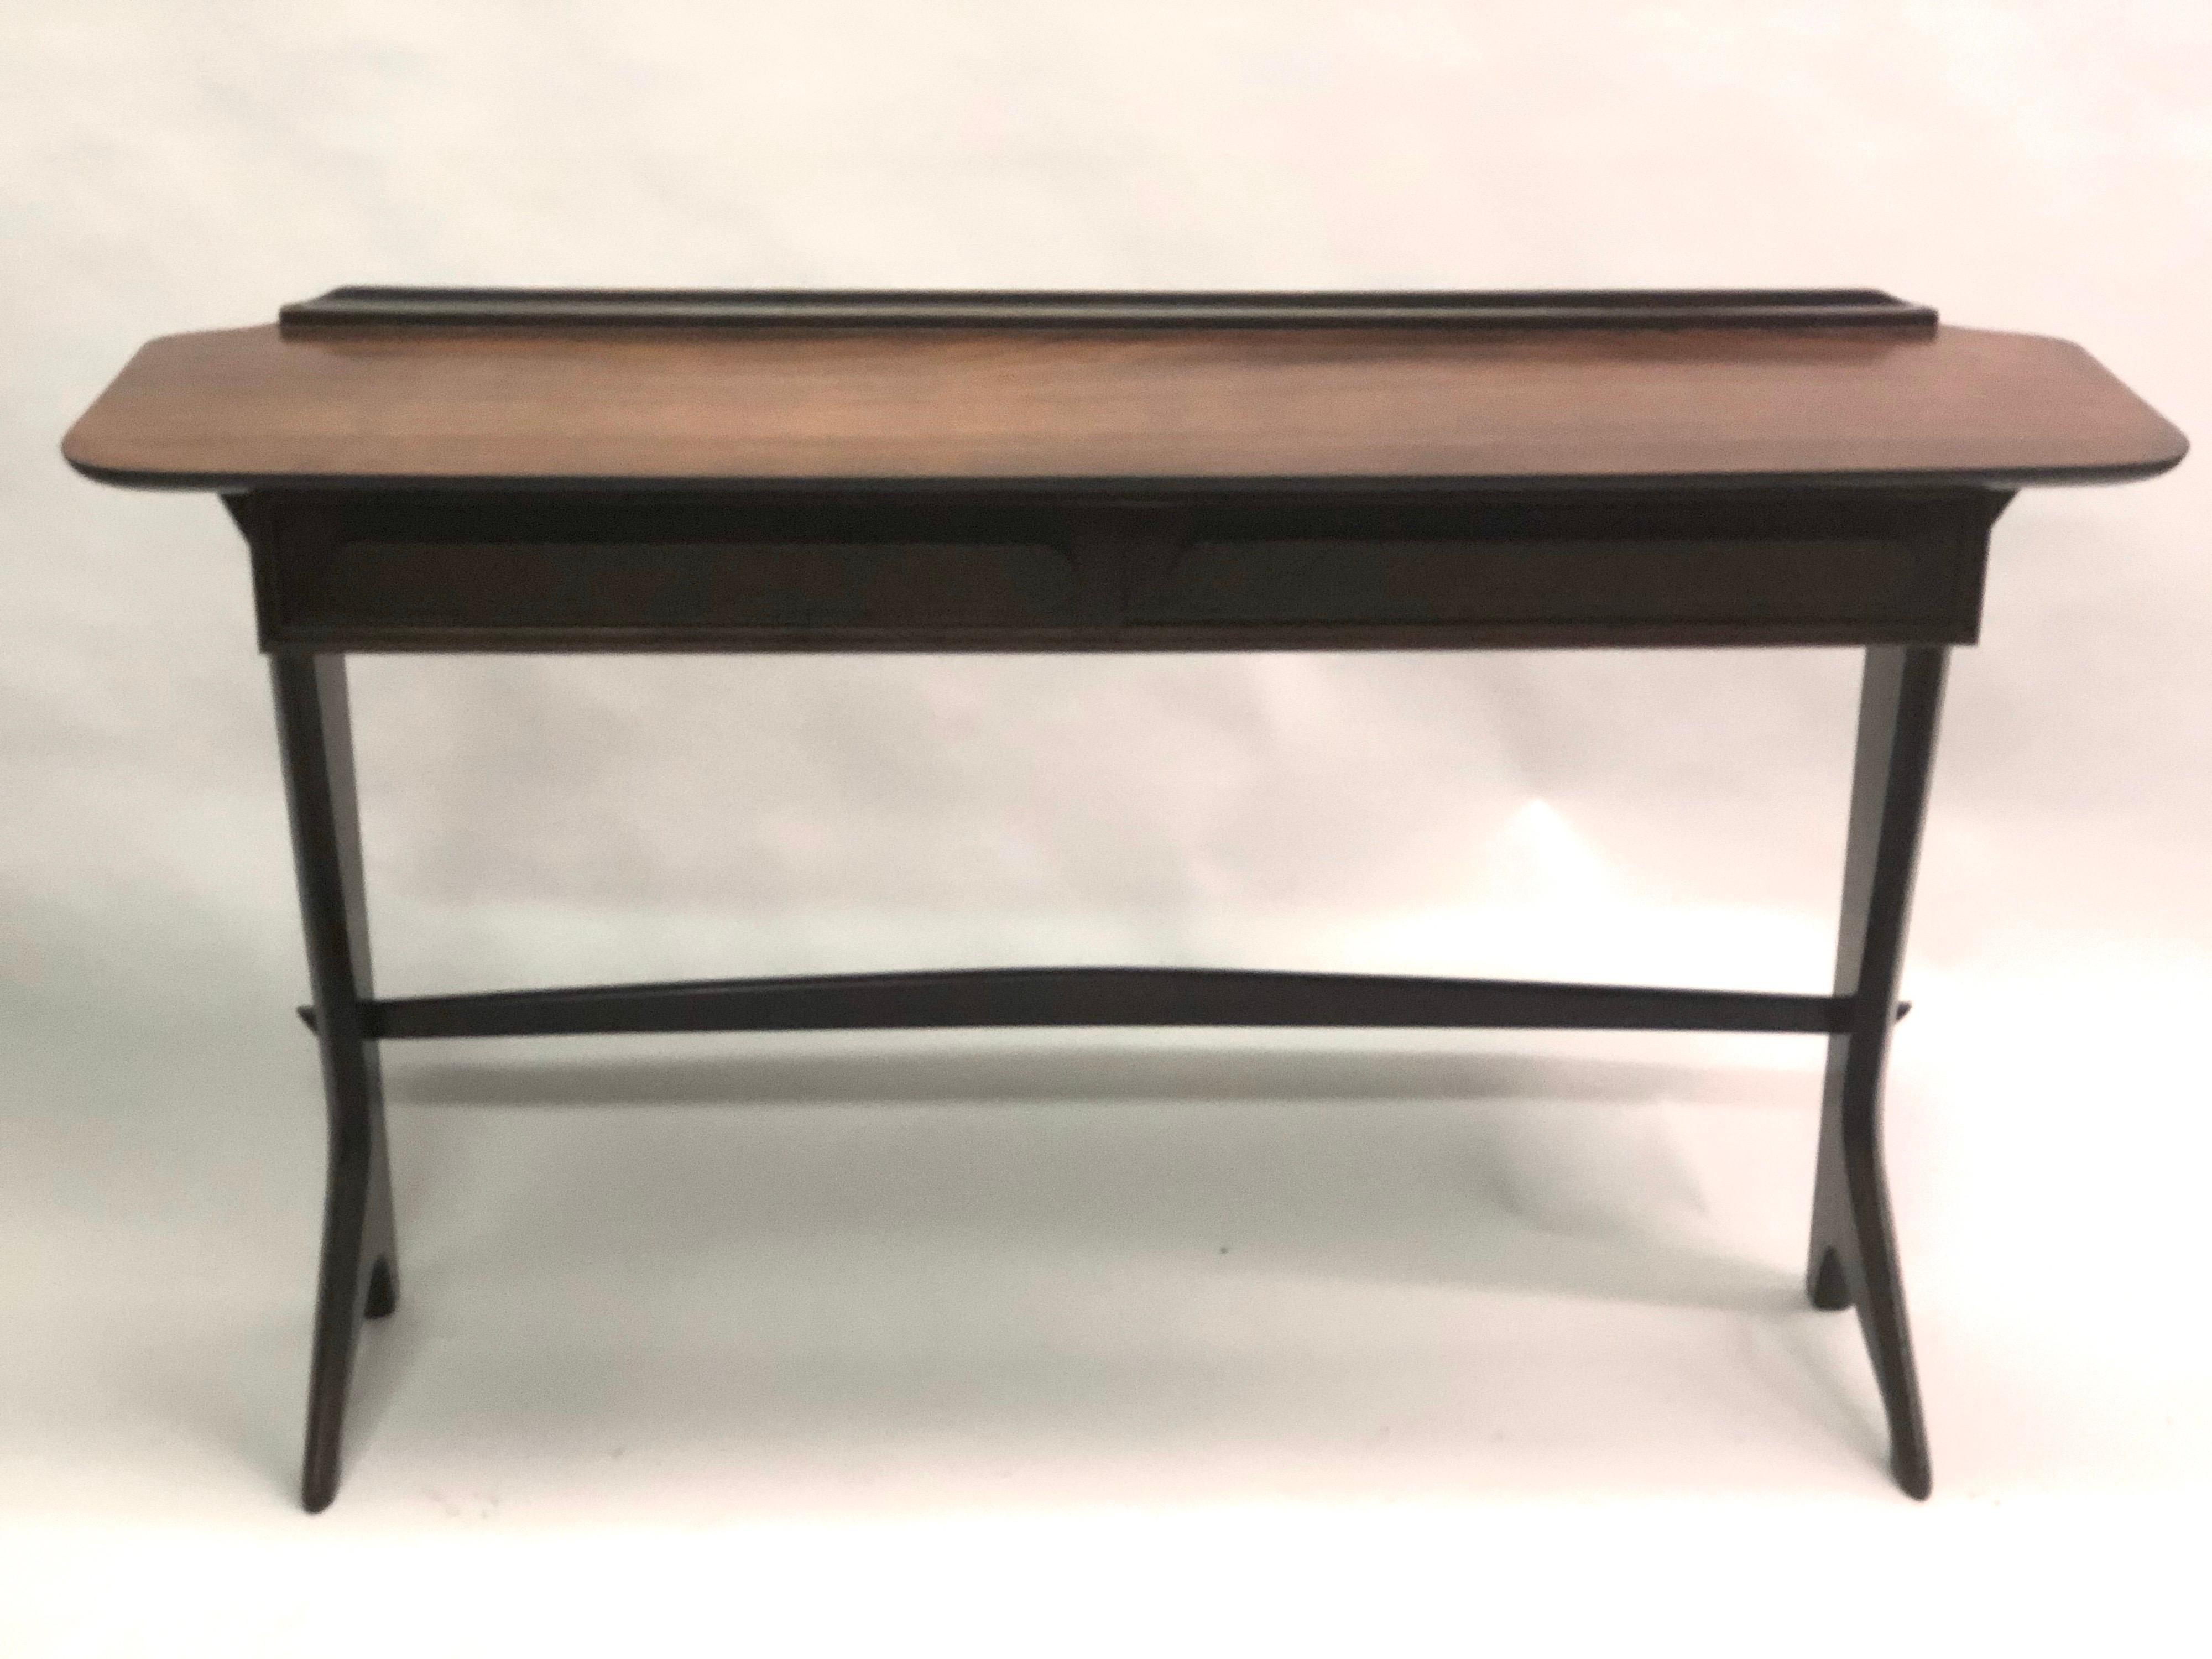 Rare and Important Italian Mid-Century Modern Rosewood Console by Ico Parisi 1